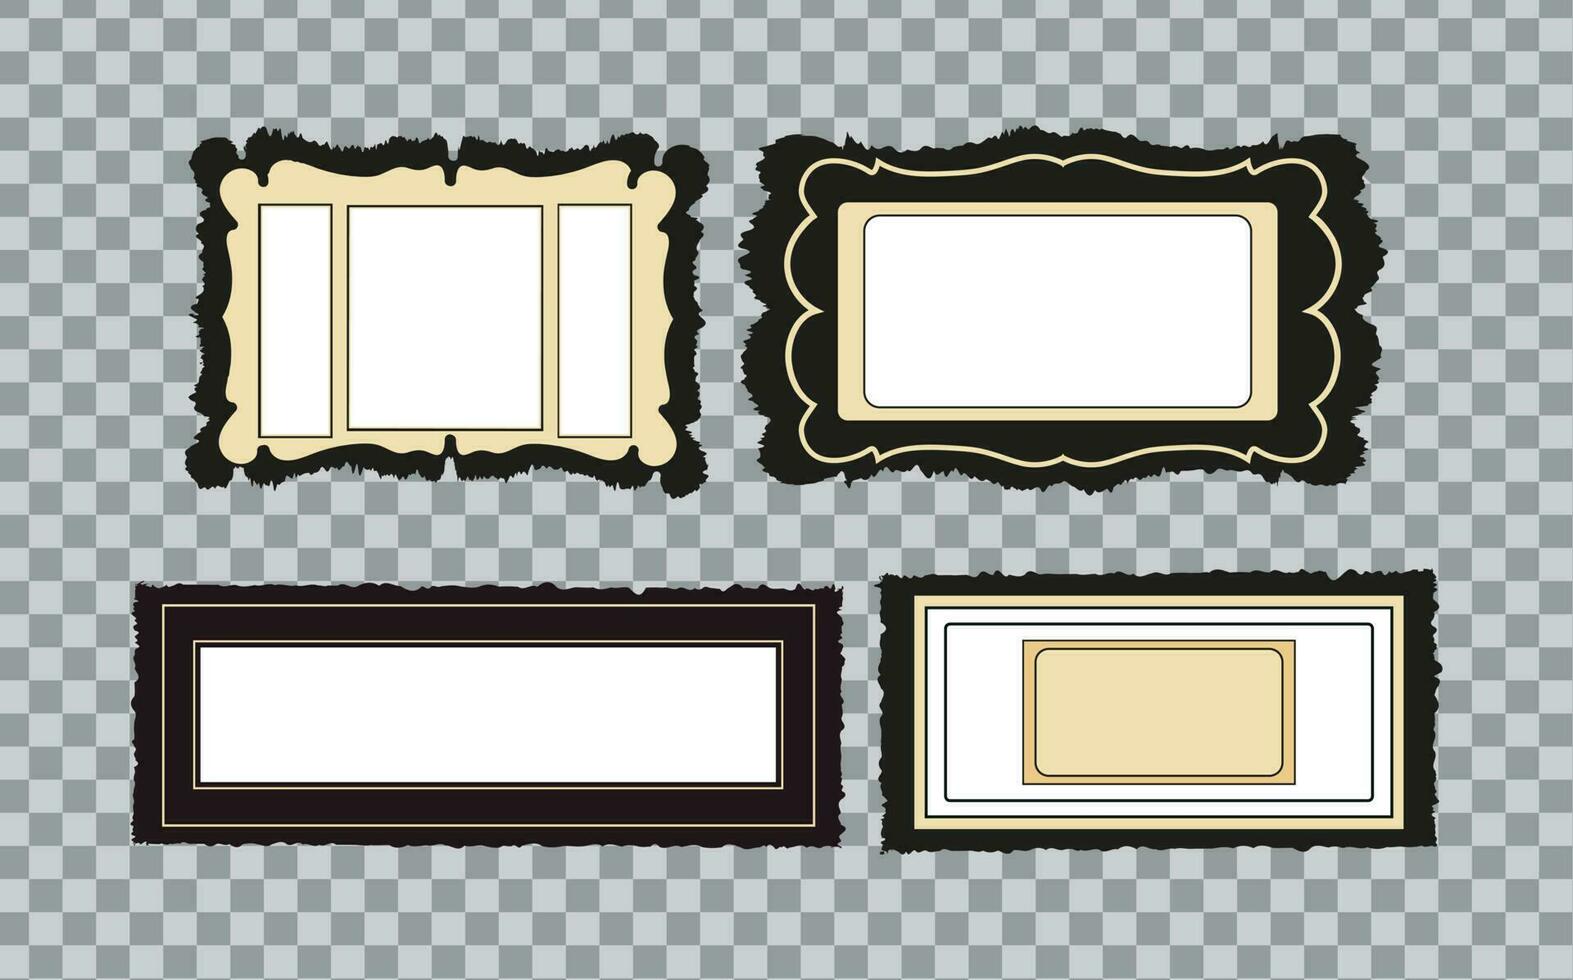 A set of vintage photo frames with decorative elements from past eras.Vintage concept design for scrapbooks and home interiors. vector